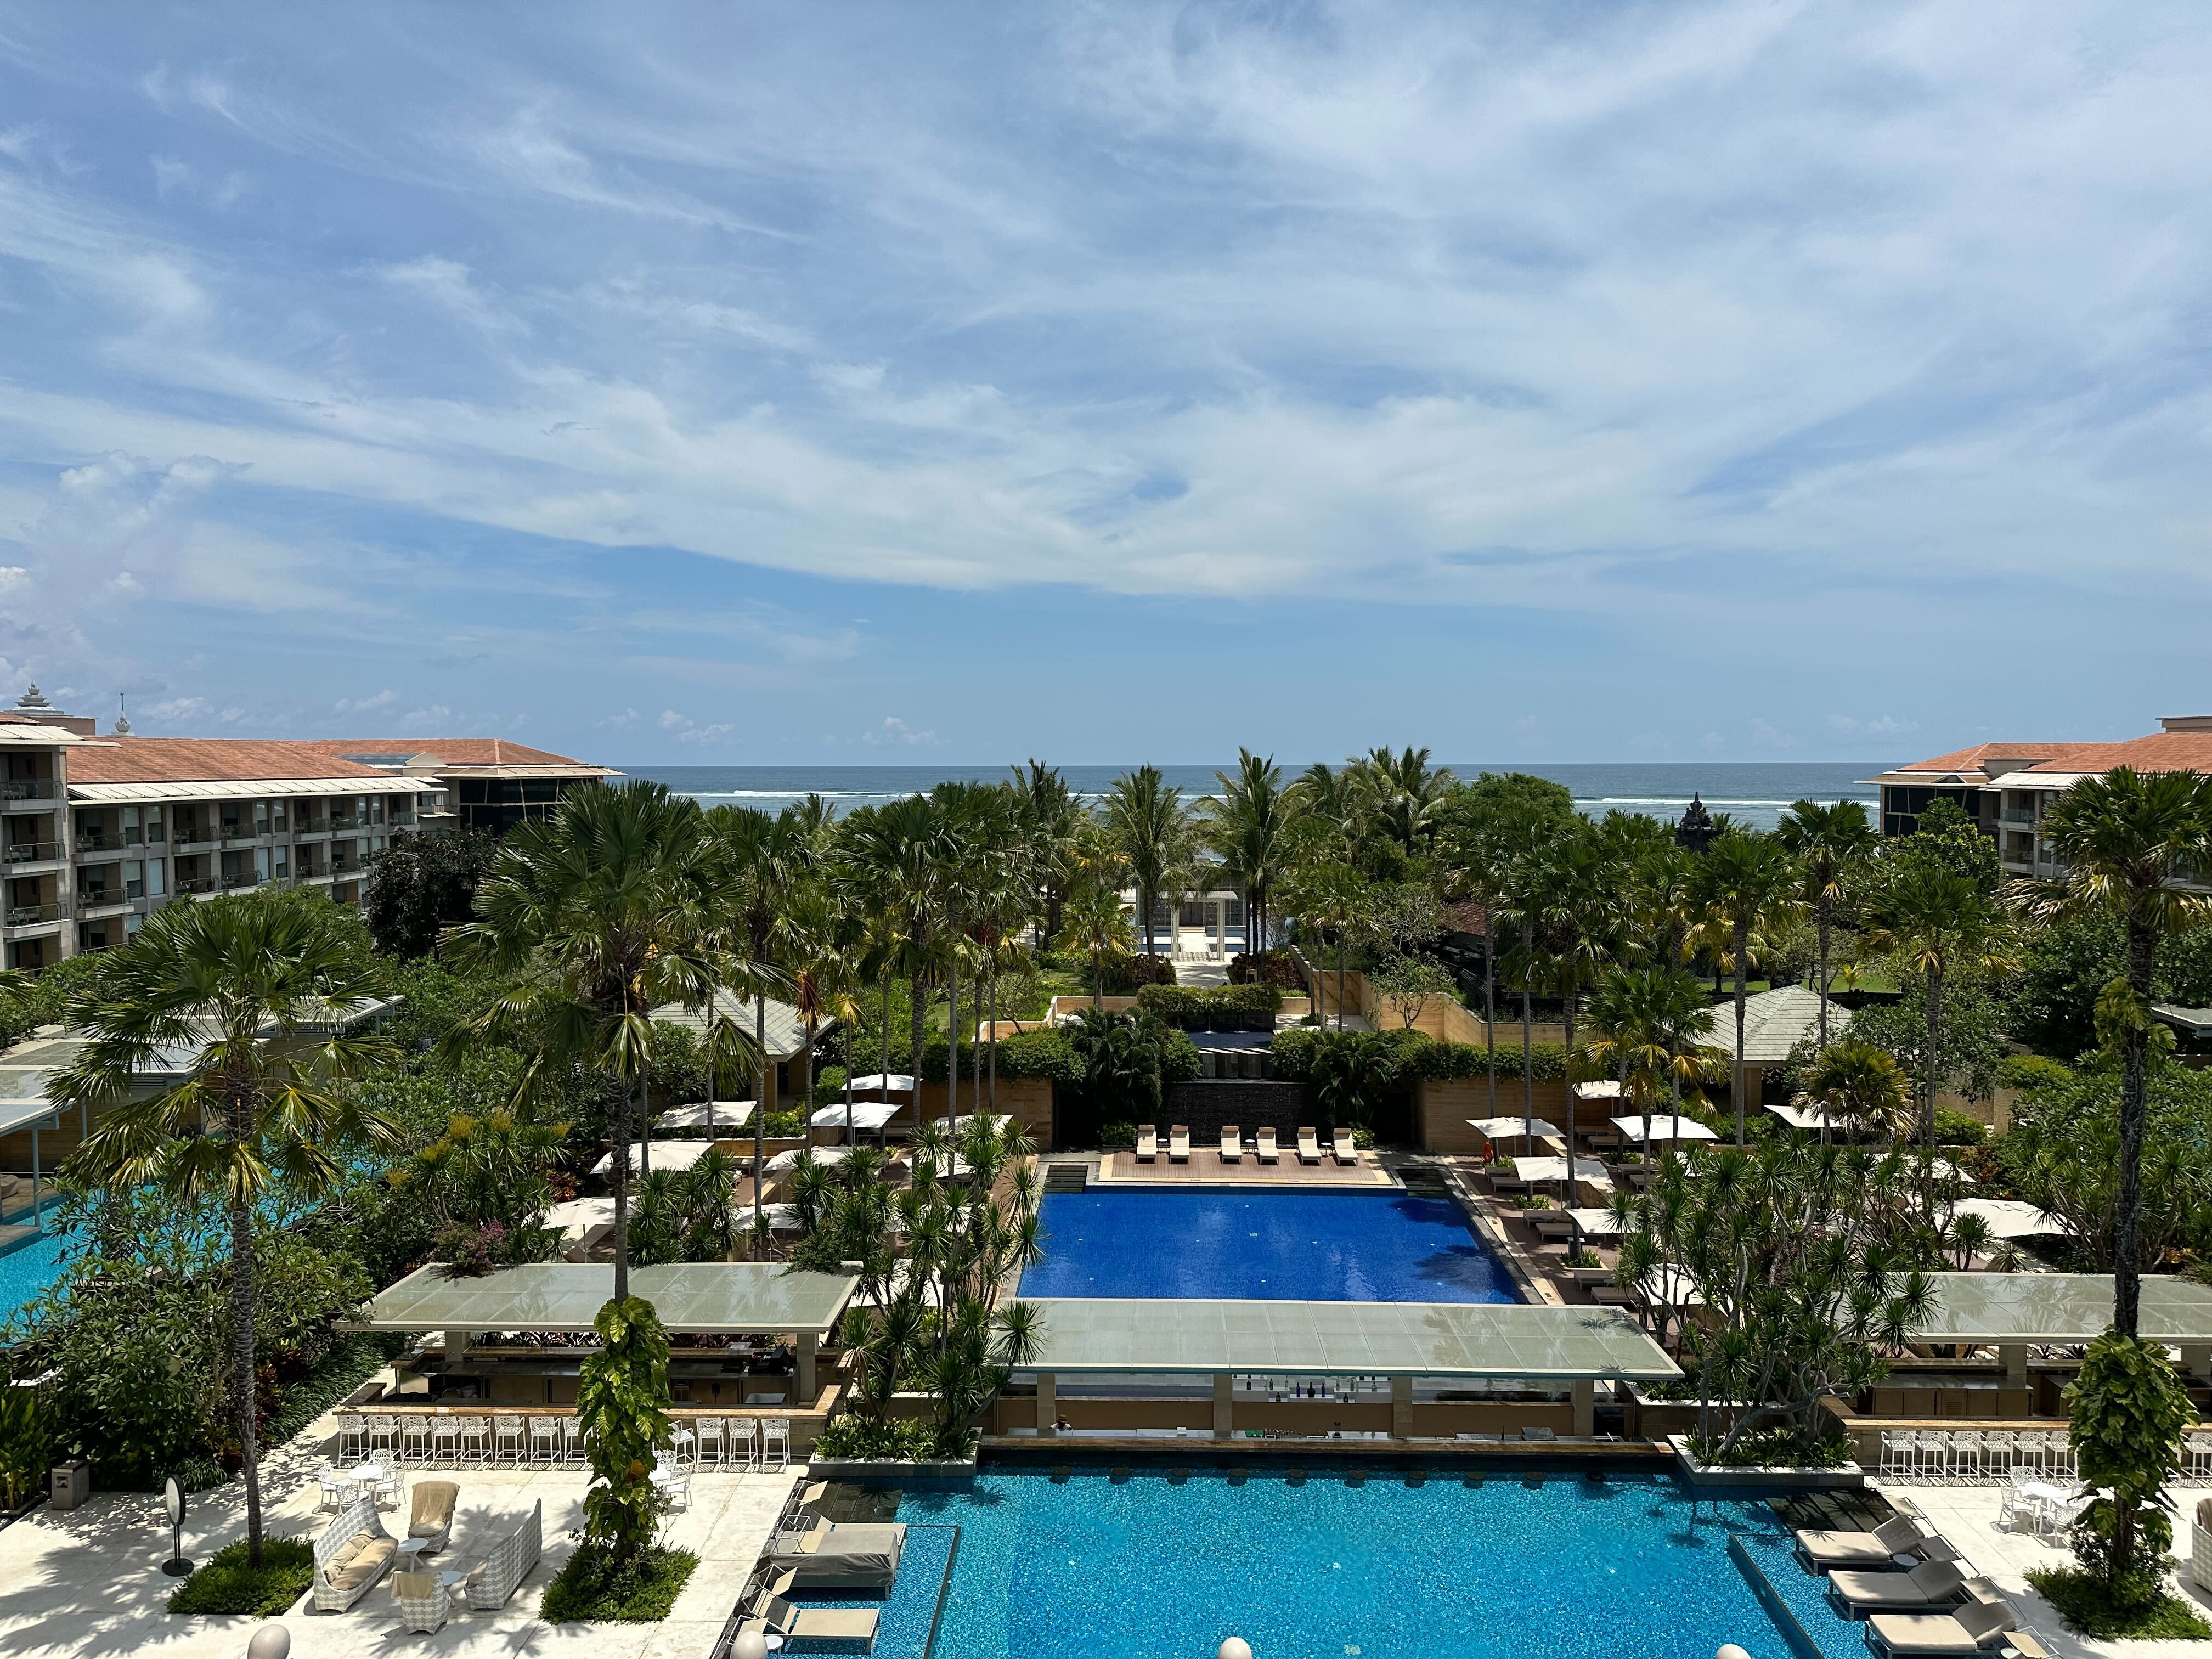 View of The Mulia, a luxury beachside hotel in Indonesia’s resort island of Bali, where US President Joe Biden and Chinese leader Xi Jinping are meeting on November 14 on the sidelines of the G20 leaders’ summit.